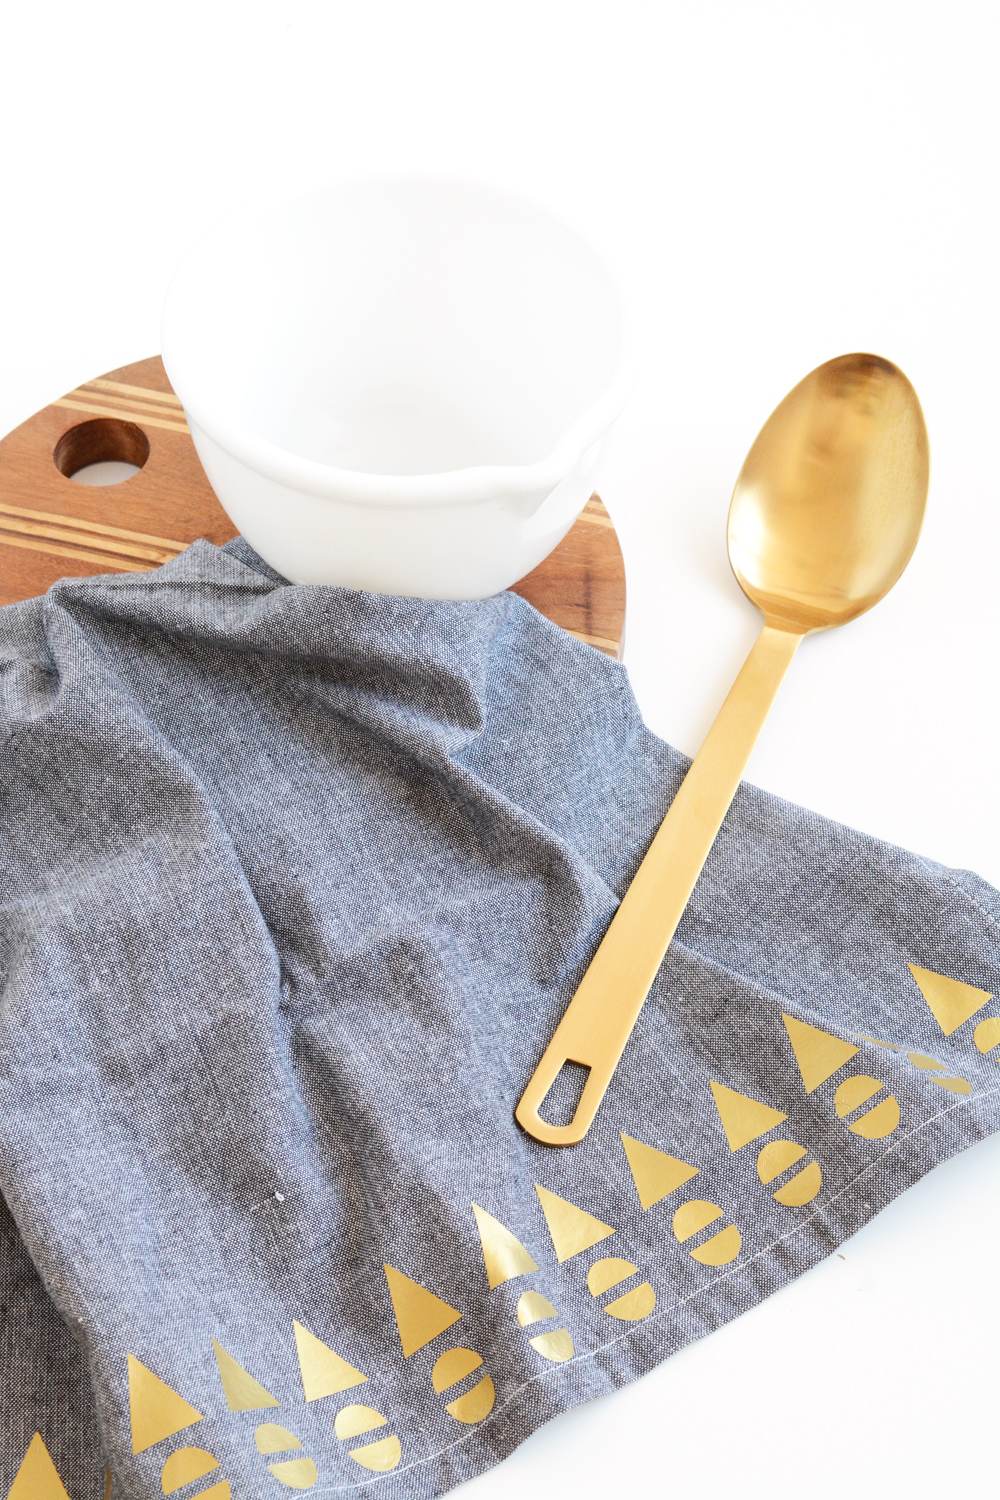 Add style to kitchen linens with the Cricut Gold for JoAnn